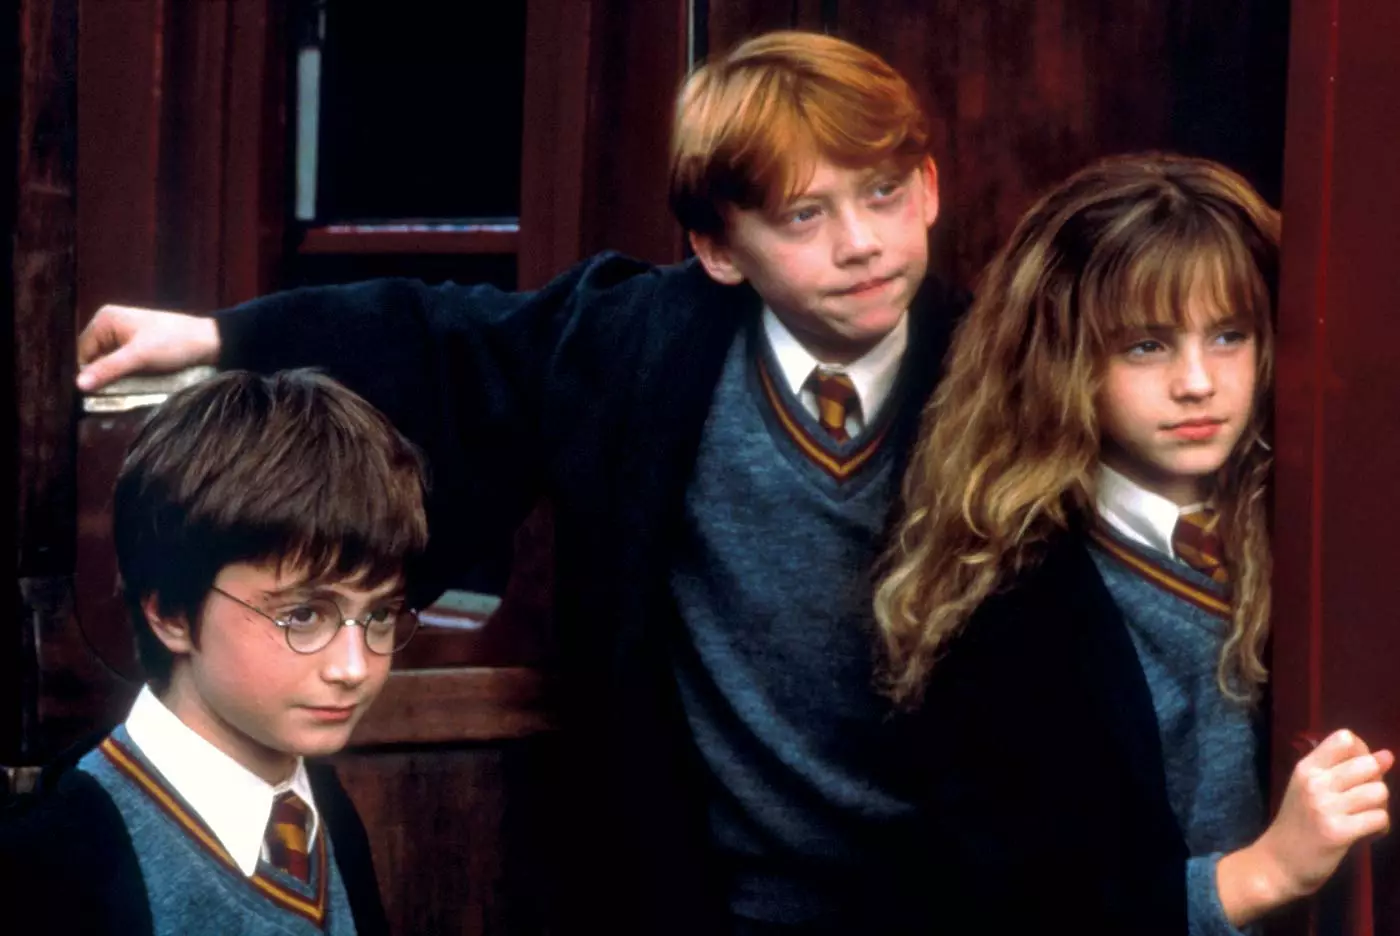 Daniel Radcliffe and his castmates in the first movie.